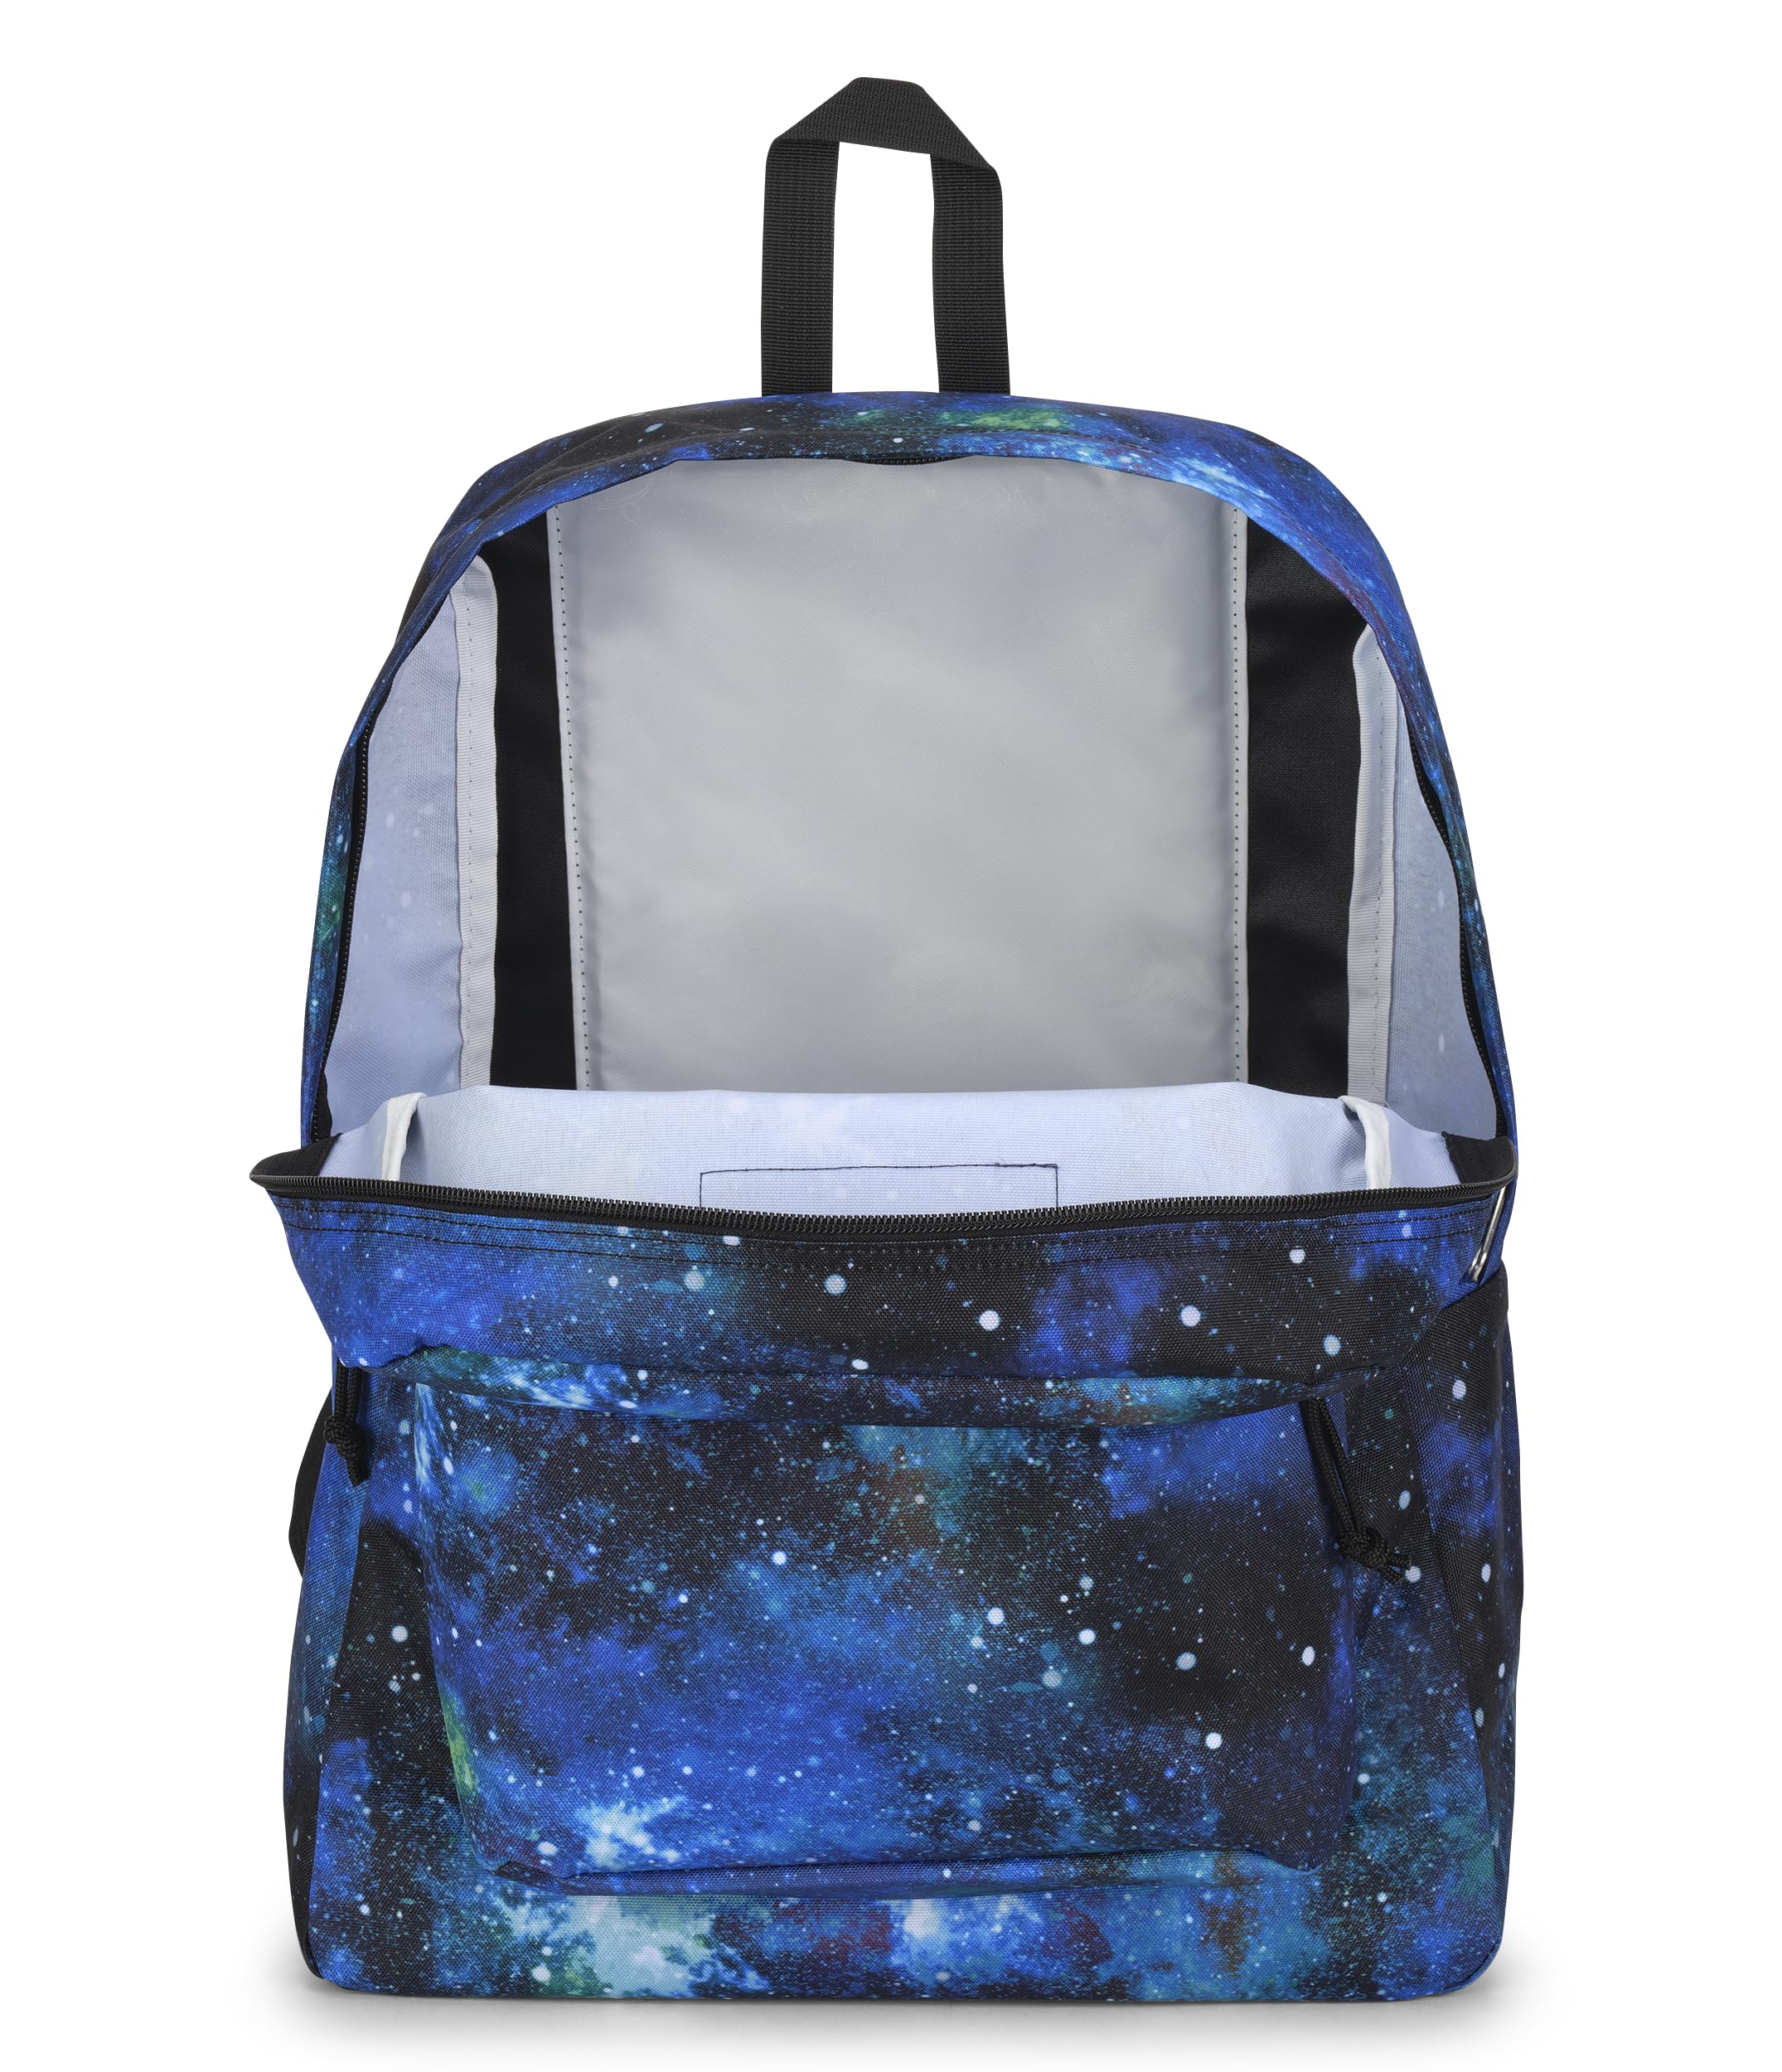 JanSport SuperBreak One Backpacks - Durable, Lightweight Bookbag with 1 Main Compartment, Front Utility Pocket with Built-in Organizer - Premium Backpack, Galaxy